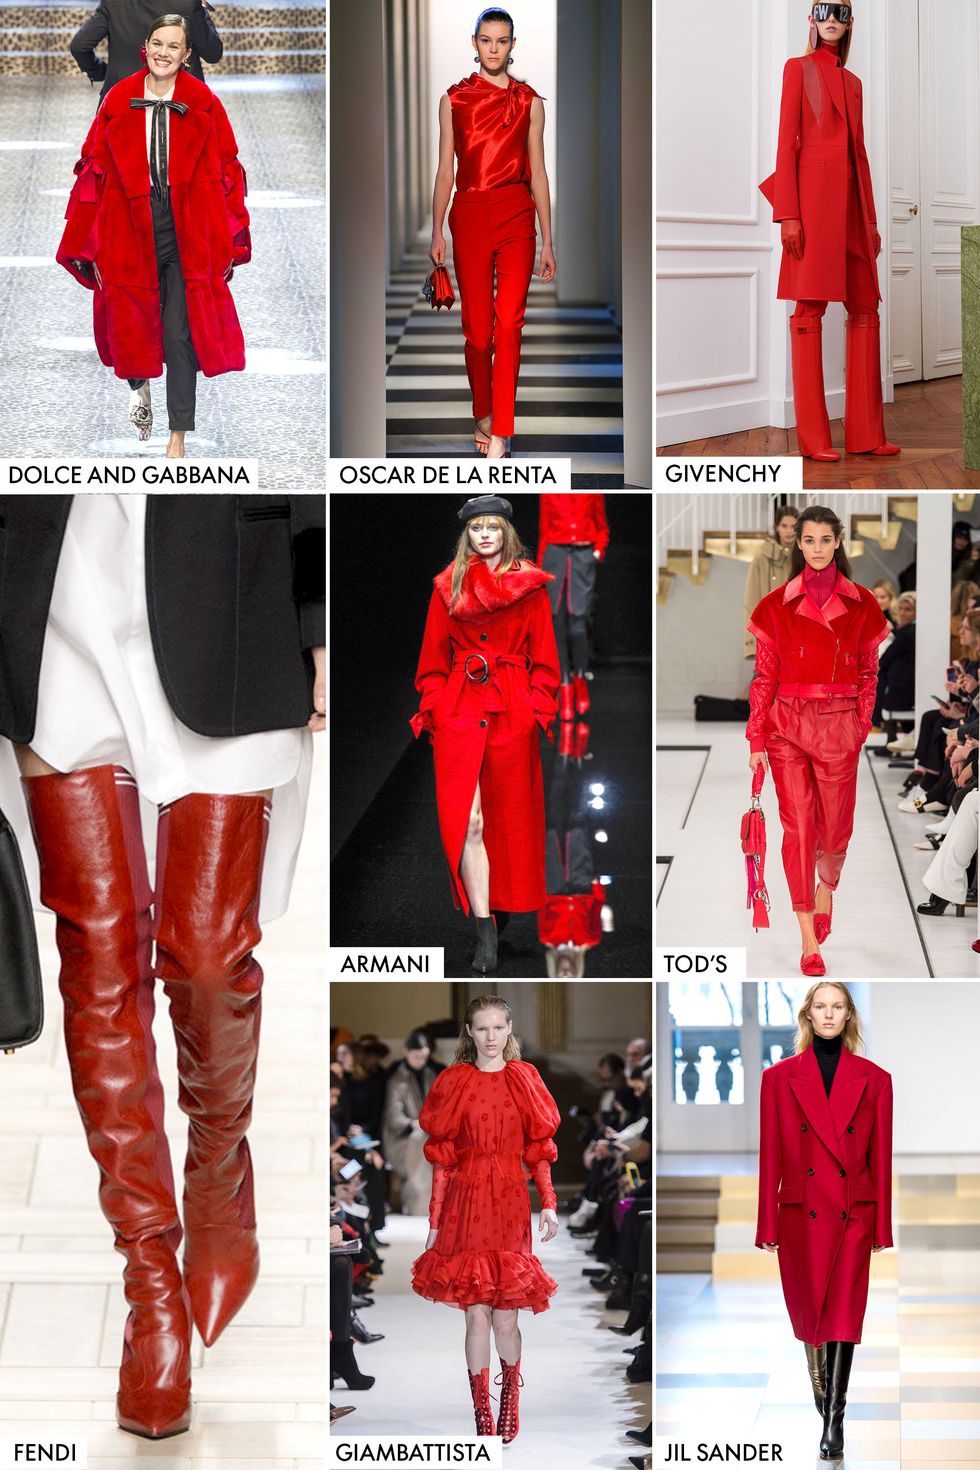 Women's shoe trends for autumn/winter, from Gucci's equestrian boots and  Victoria Beckham's metallic glitter pumps, to athleisure sneakers from Louis  Vuitton and Dior